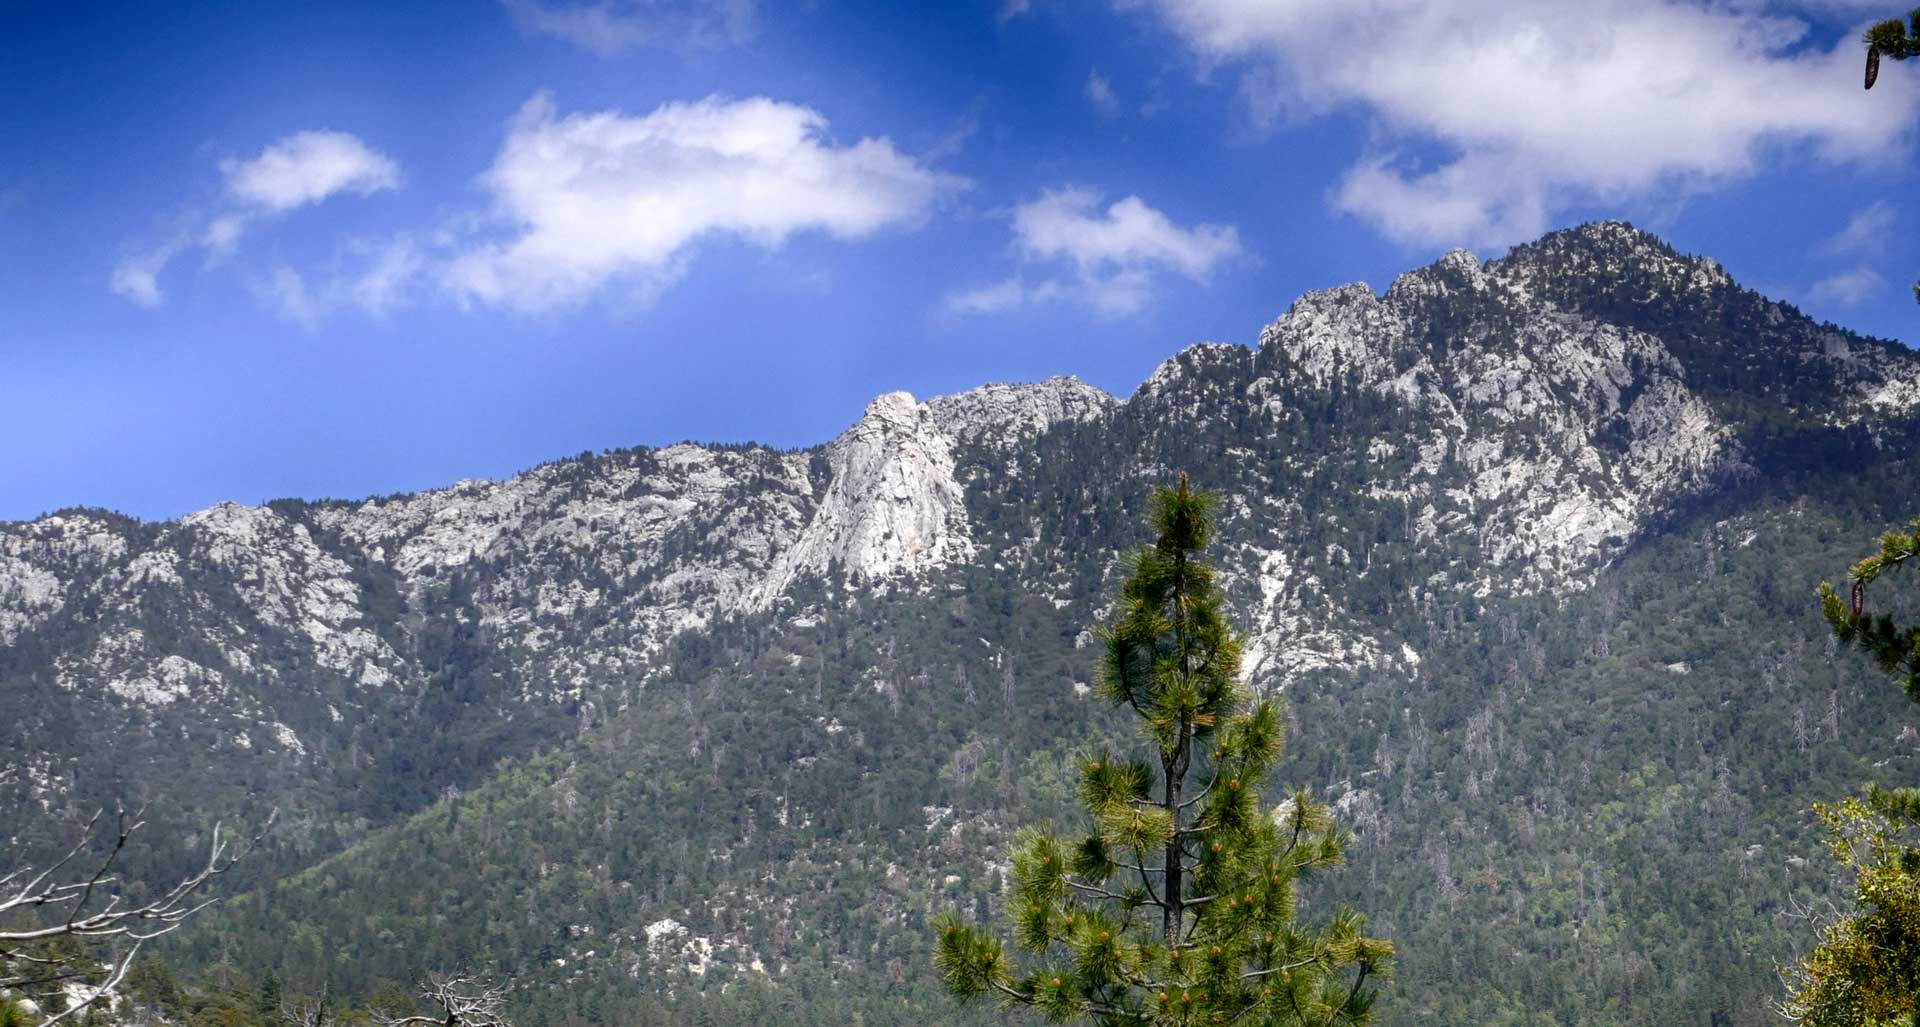 A view of Lily Rock and Tahquitz Peak above the town of Idyllwild, CA leading to best hiking trails.